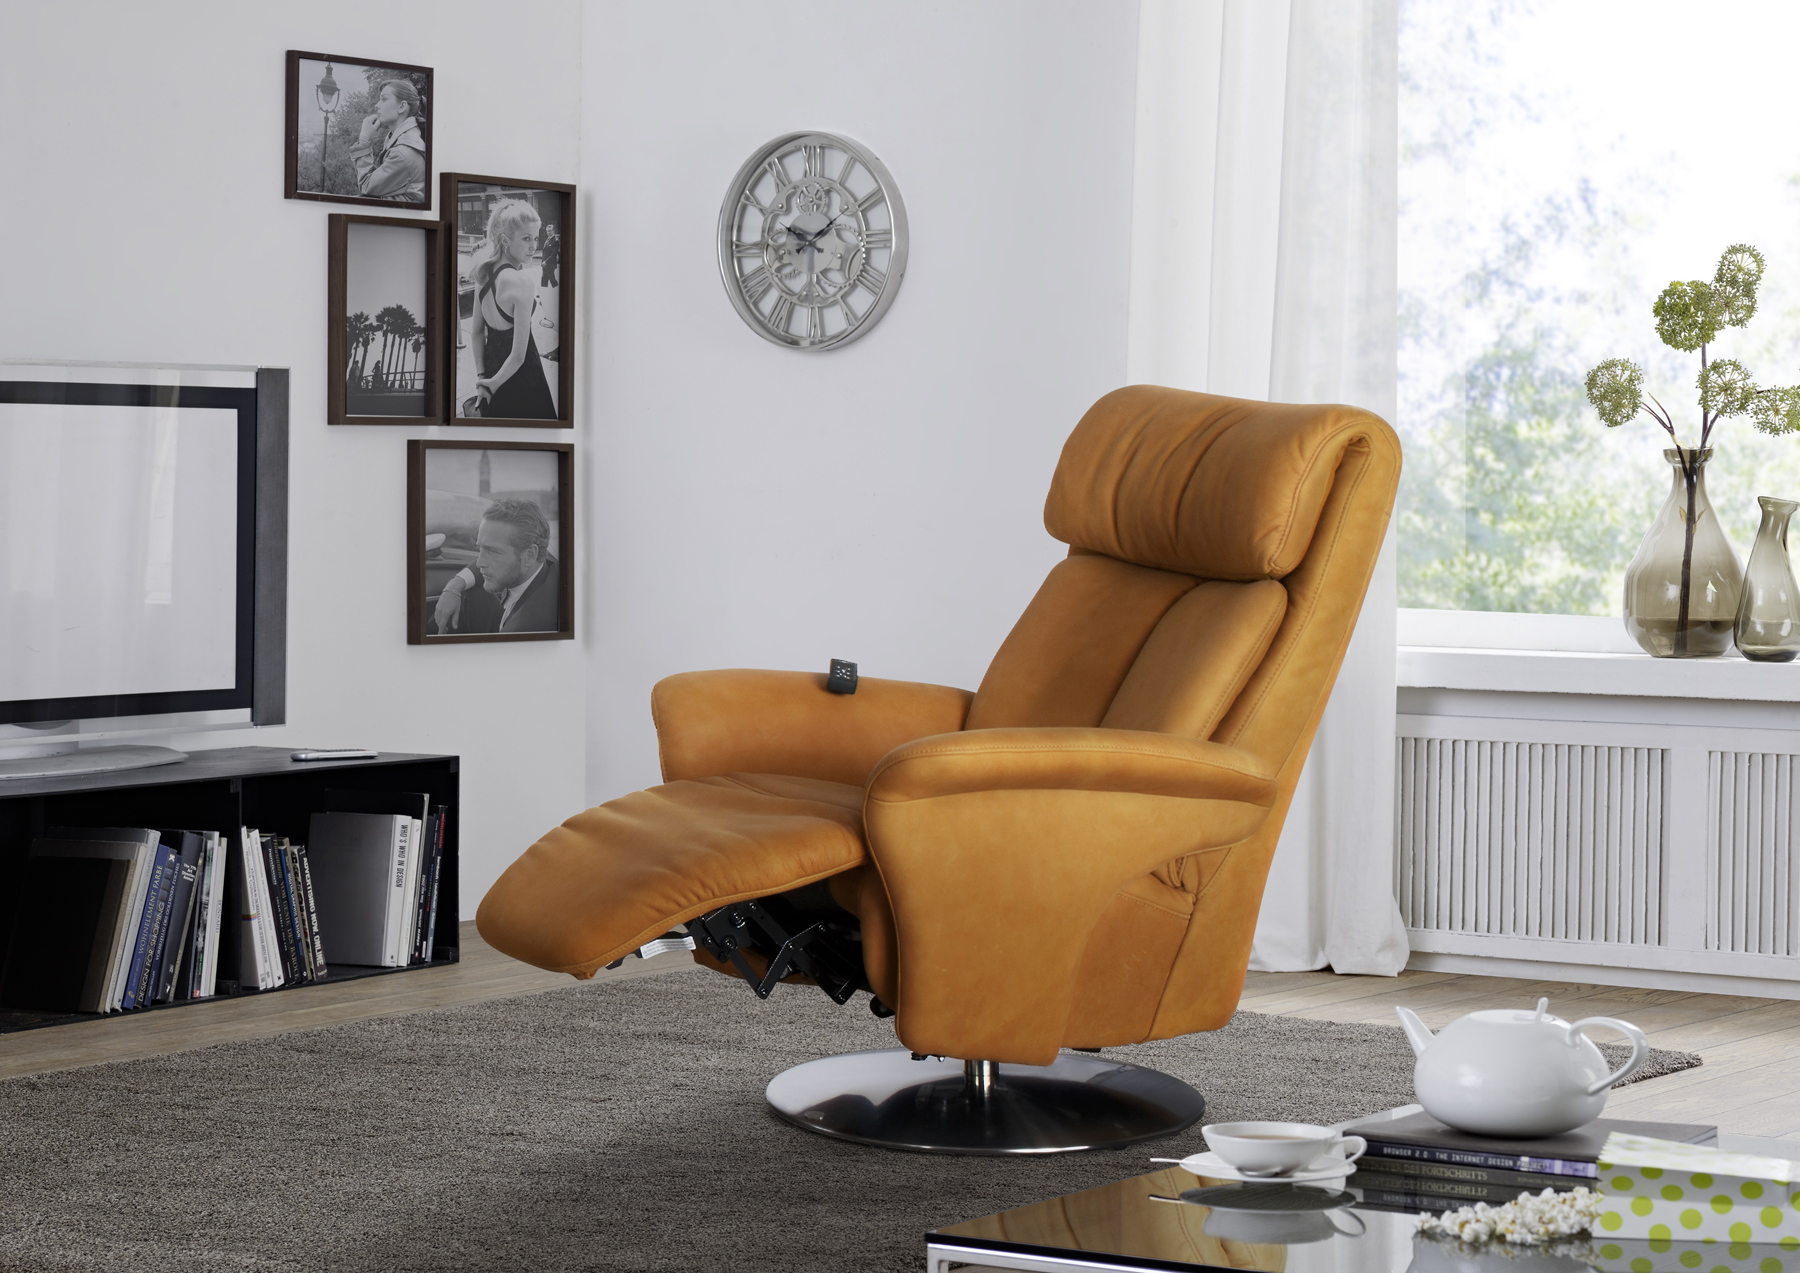 HIMOLLA SINARTRA ORANGE LEATHER CHAIR RECLINED ROOM SET